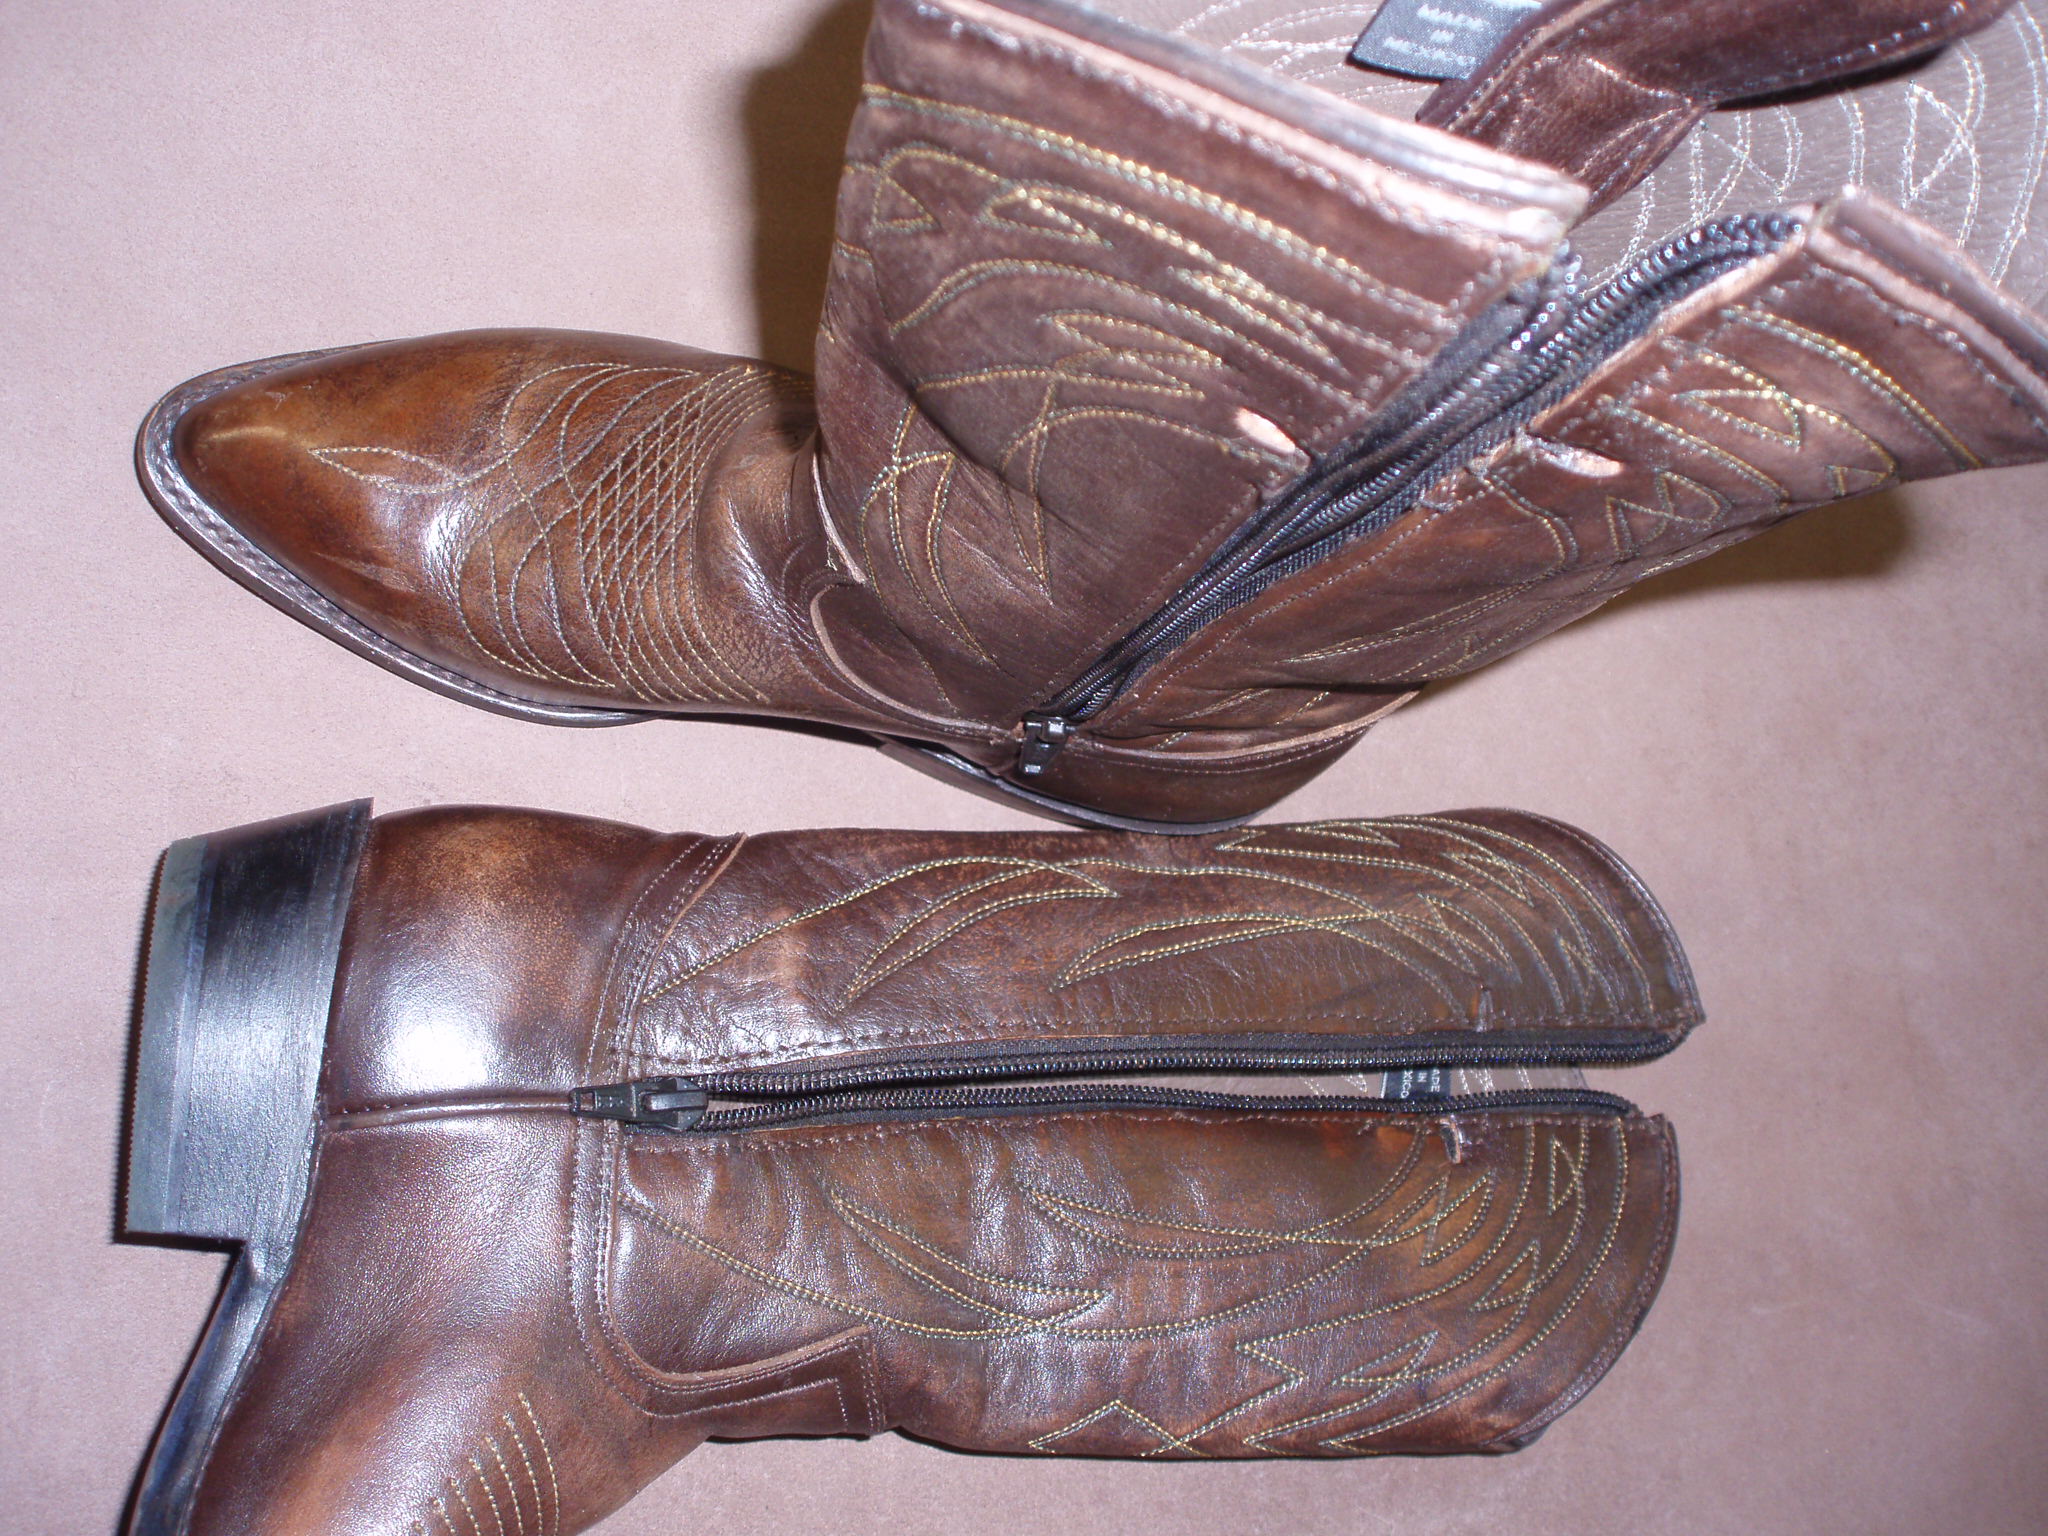 Adding zippers to western boots